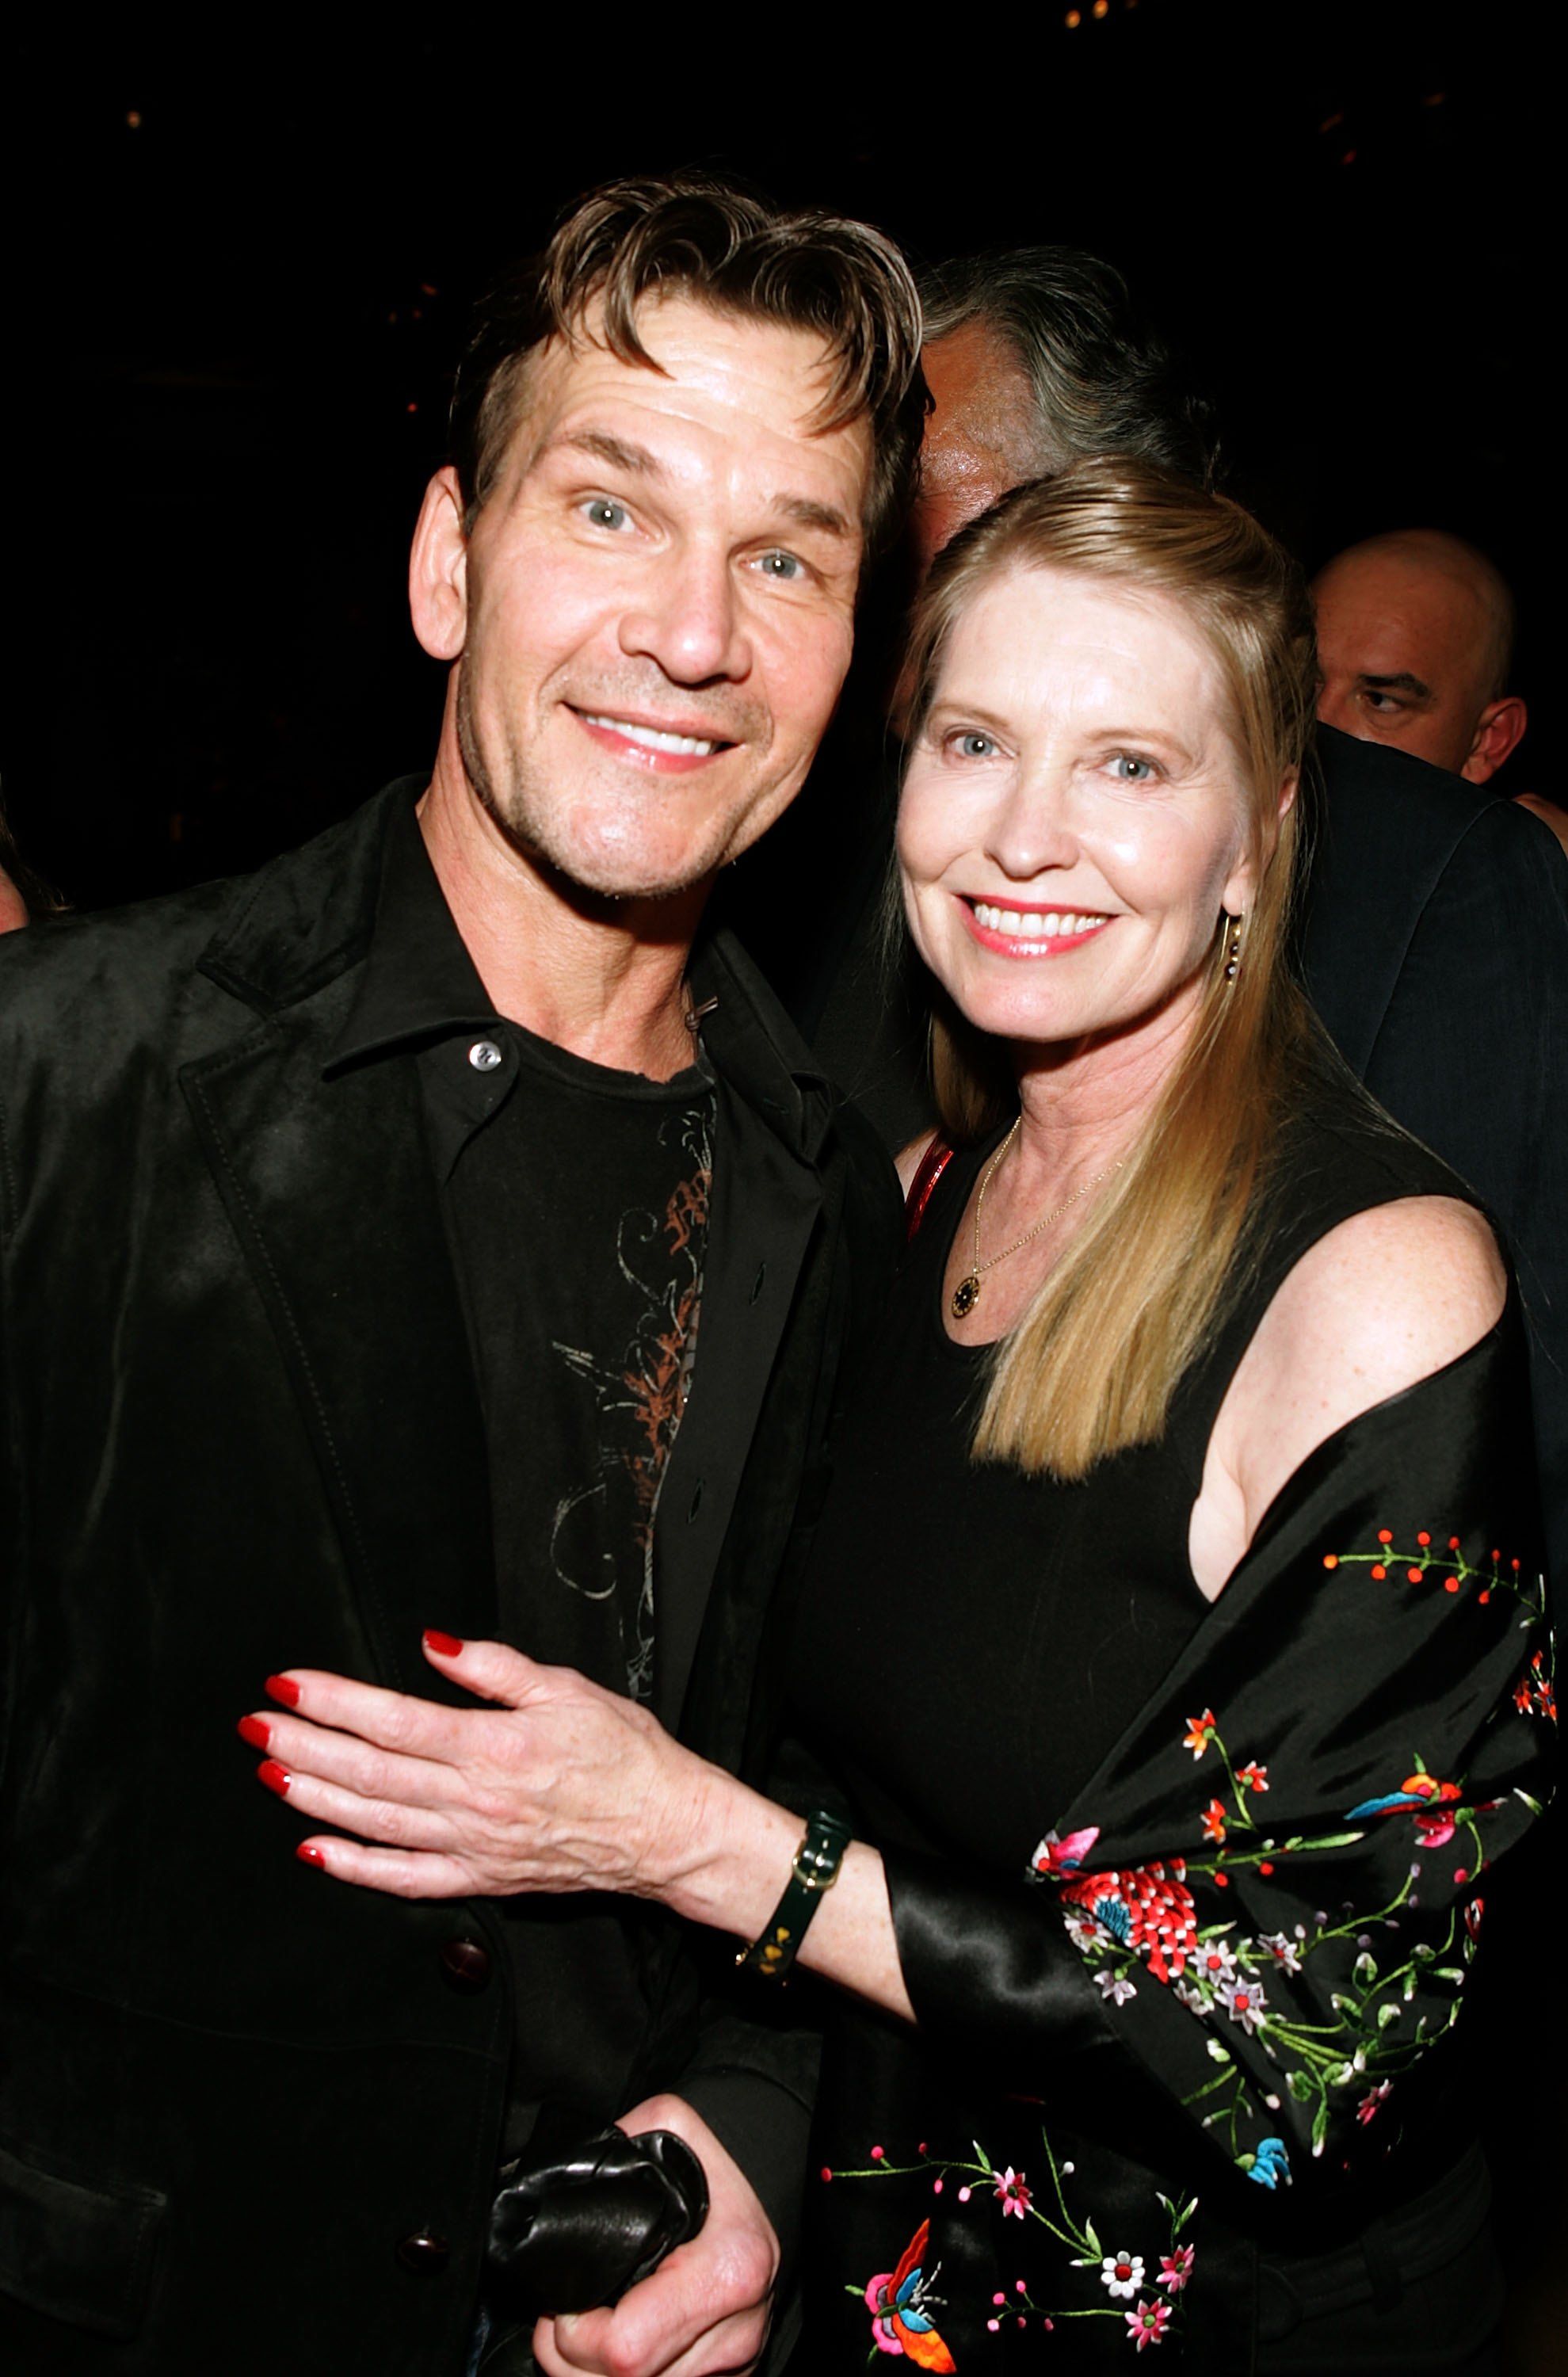 Patrick Swayze and wife Lisa Niemi pose at the premiere of "Rocky Balboa" on December 13, 2006, in Hollywood, California | Photo: Getty Images